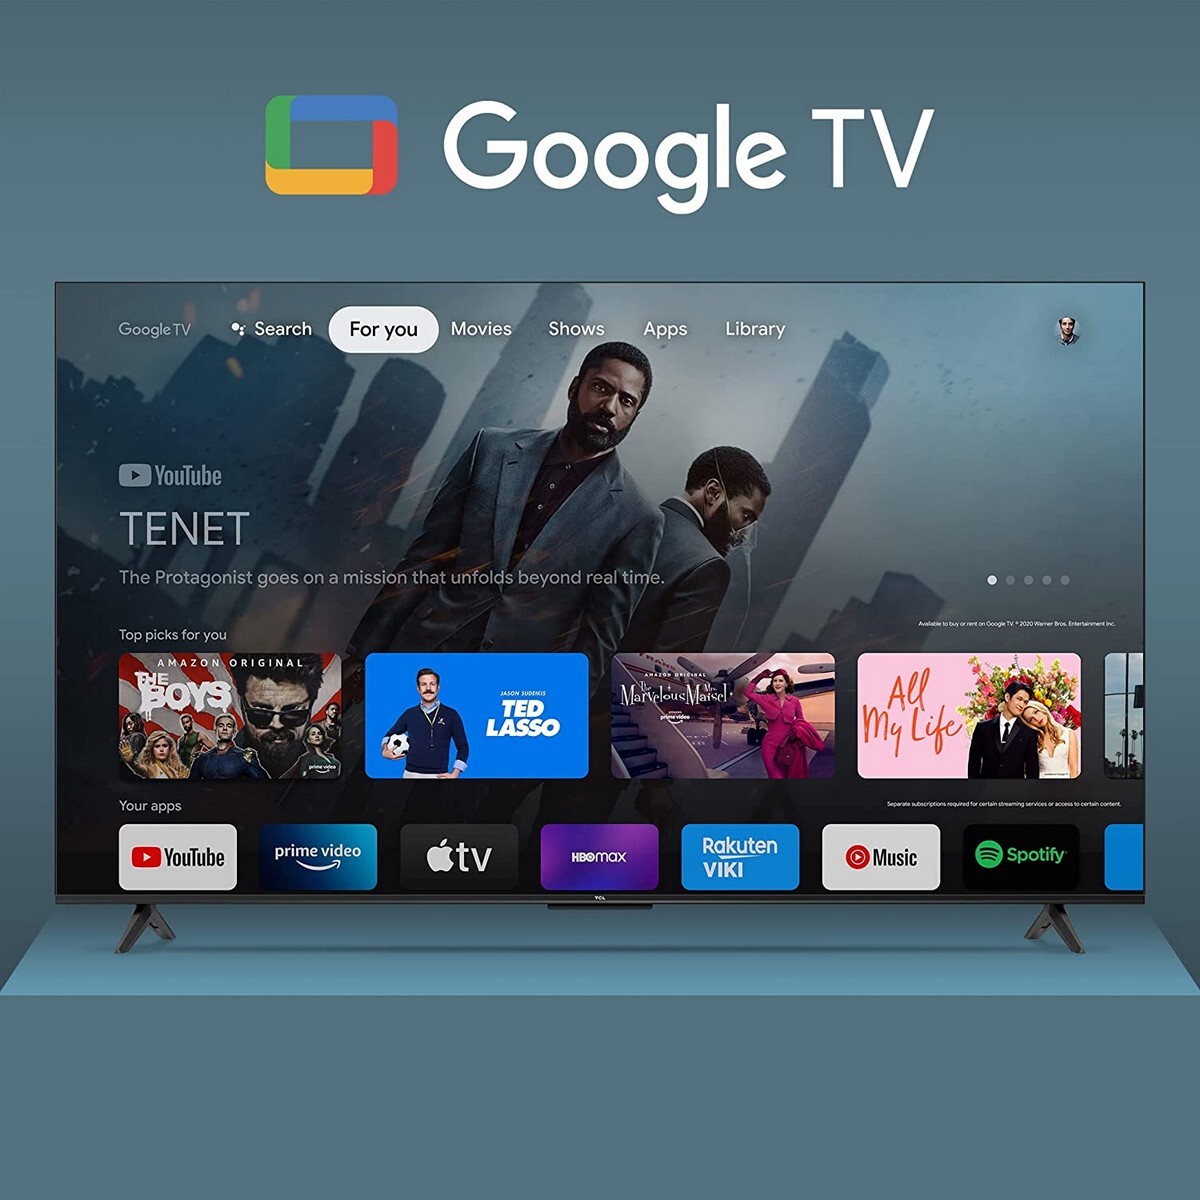 TCL 4K Ultra HD Android Smart LED Google TV 55P635 55"